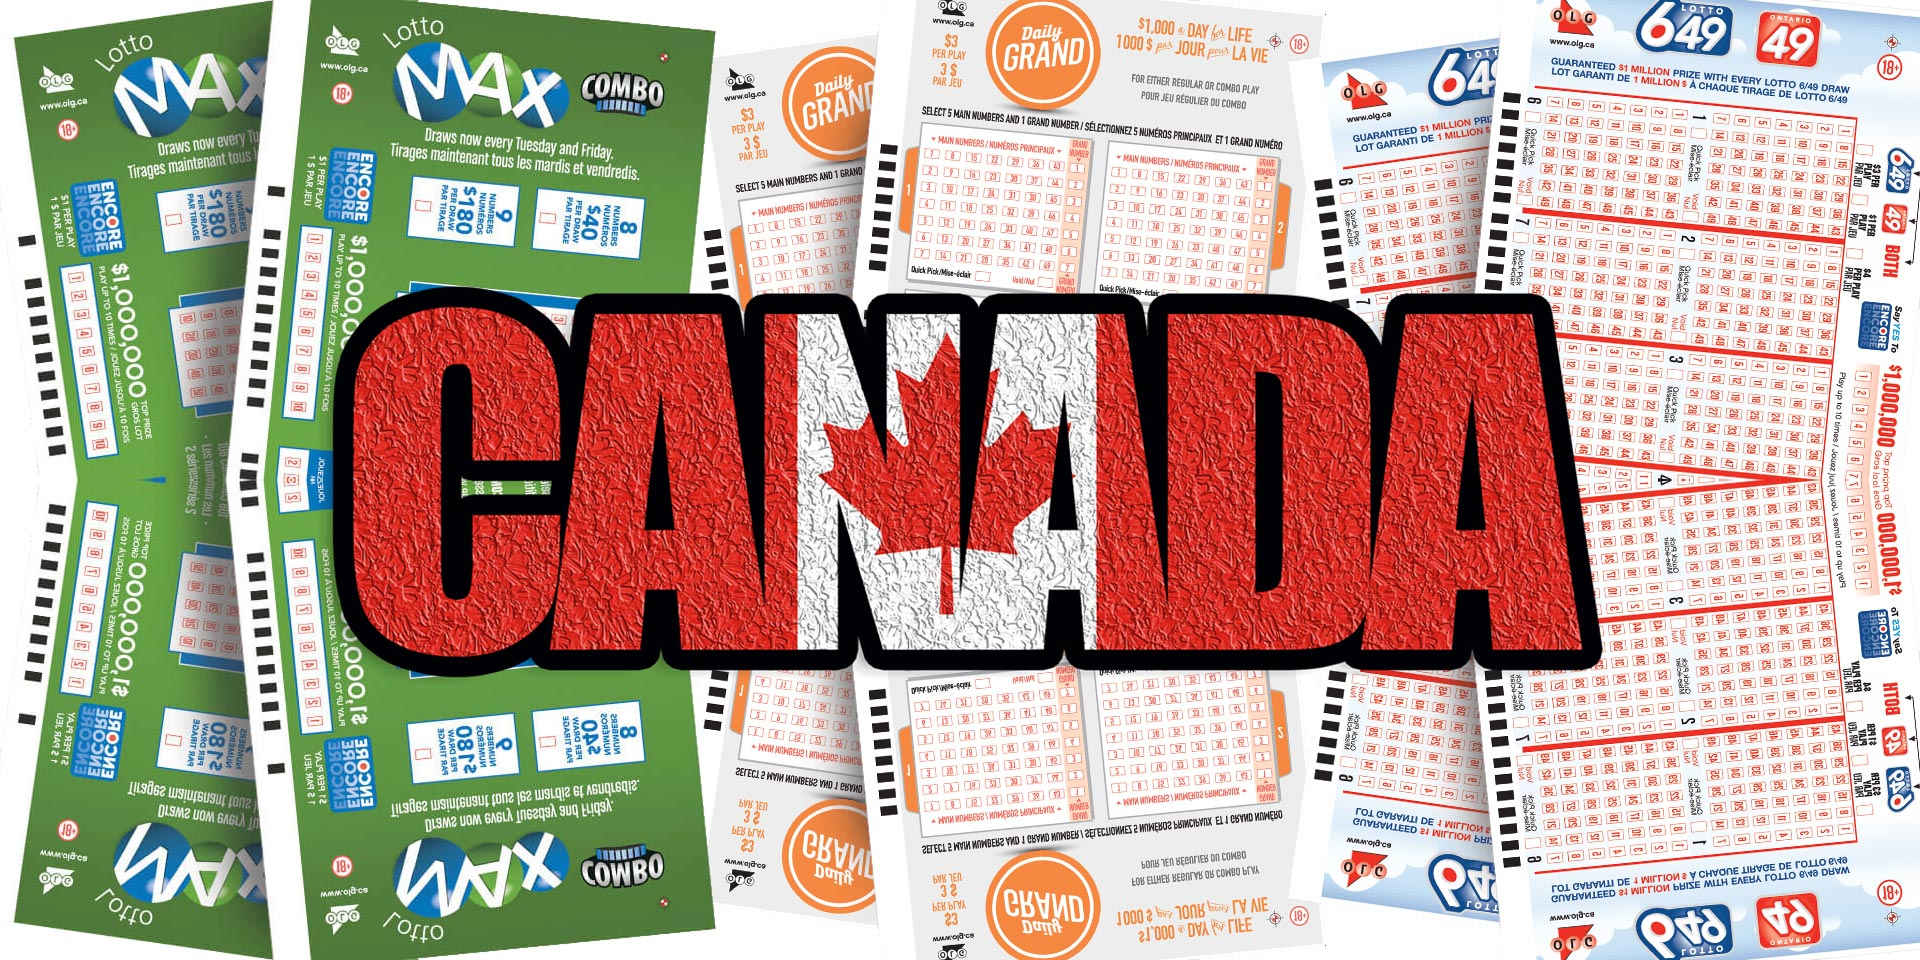 Free Lottery Tips for Playing & Winning the Lotto in Canada